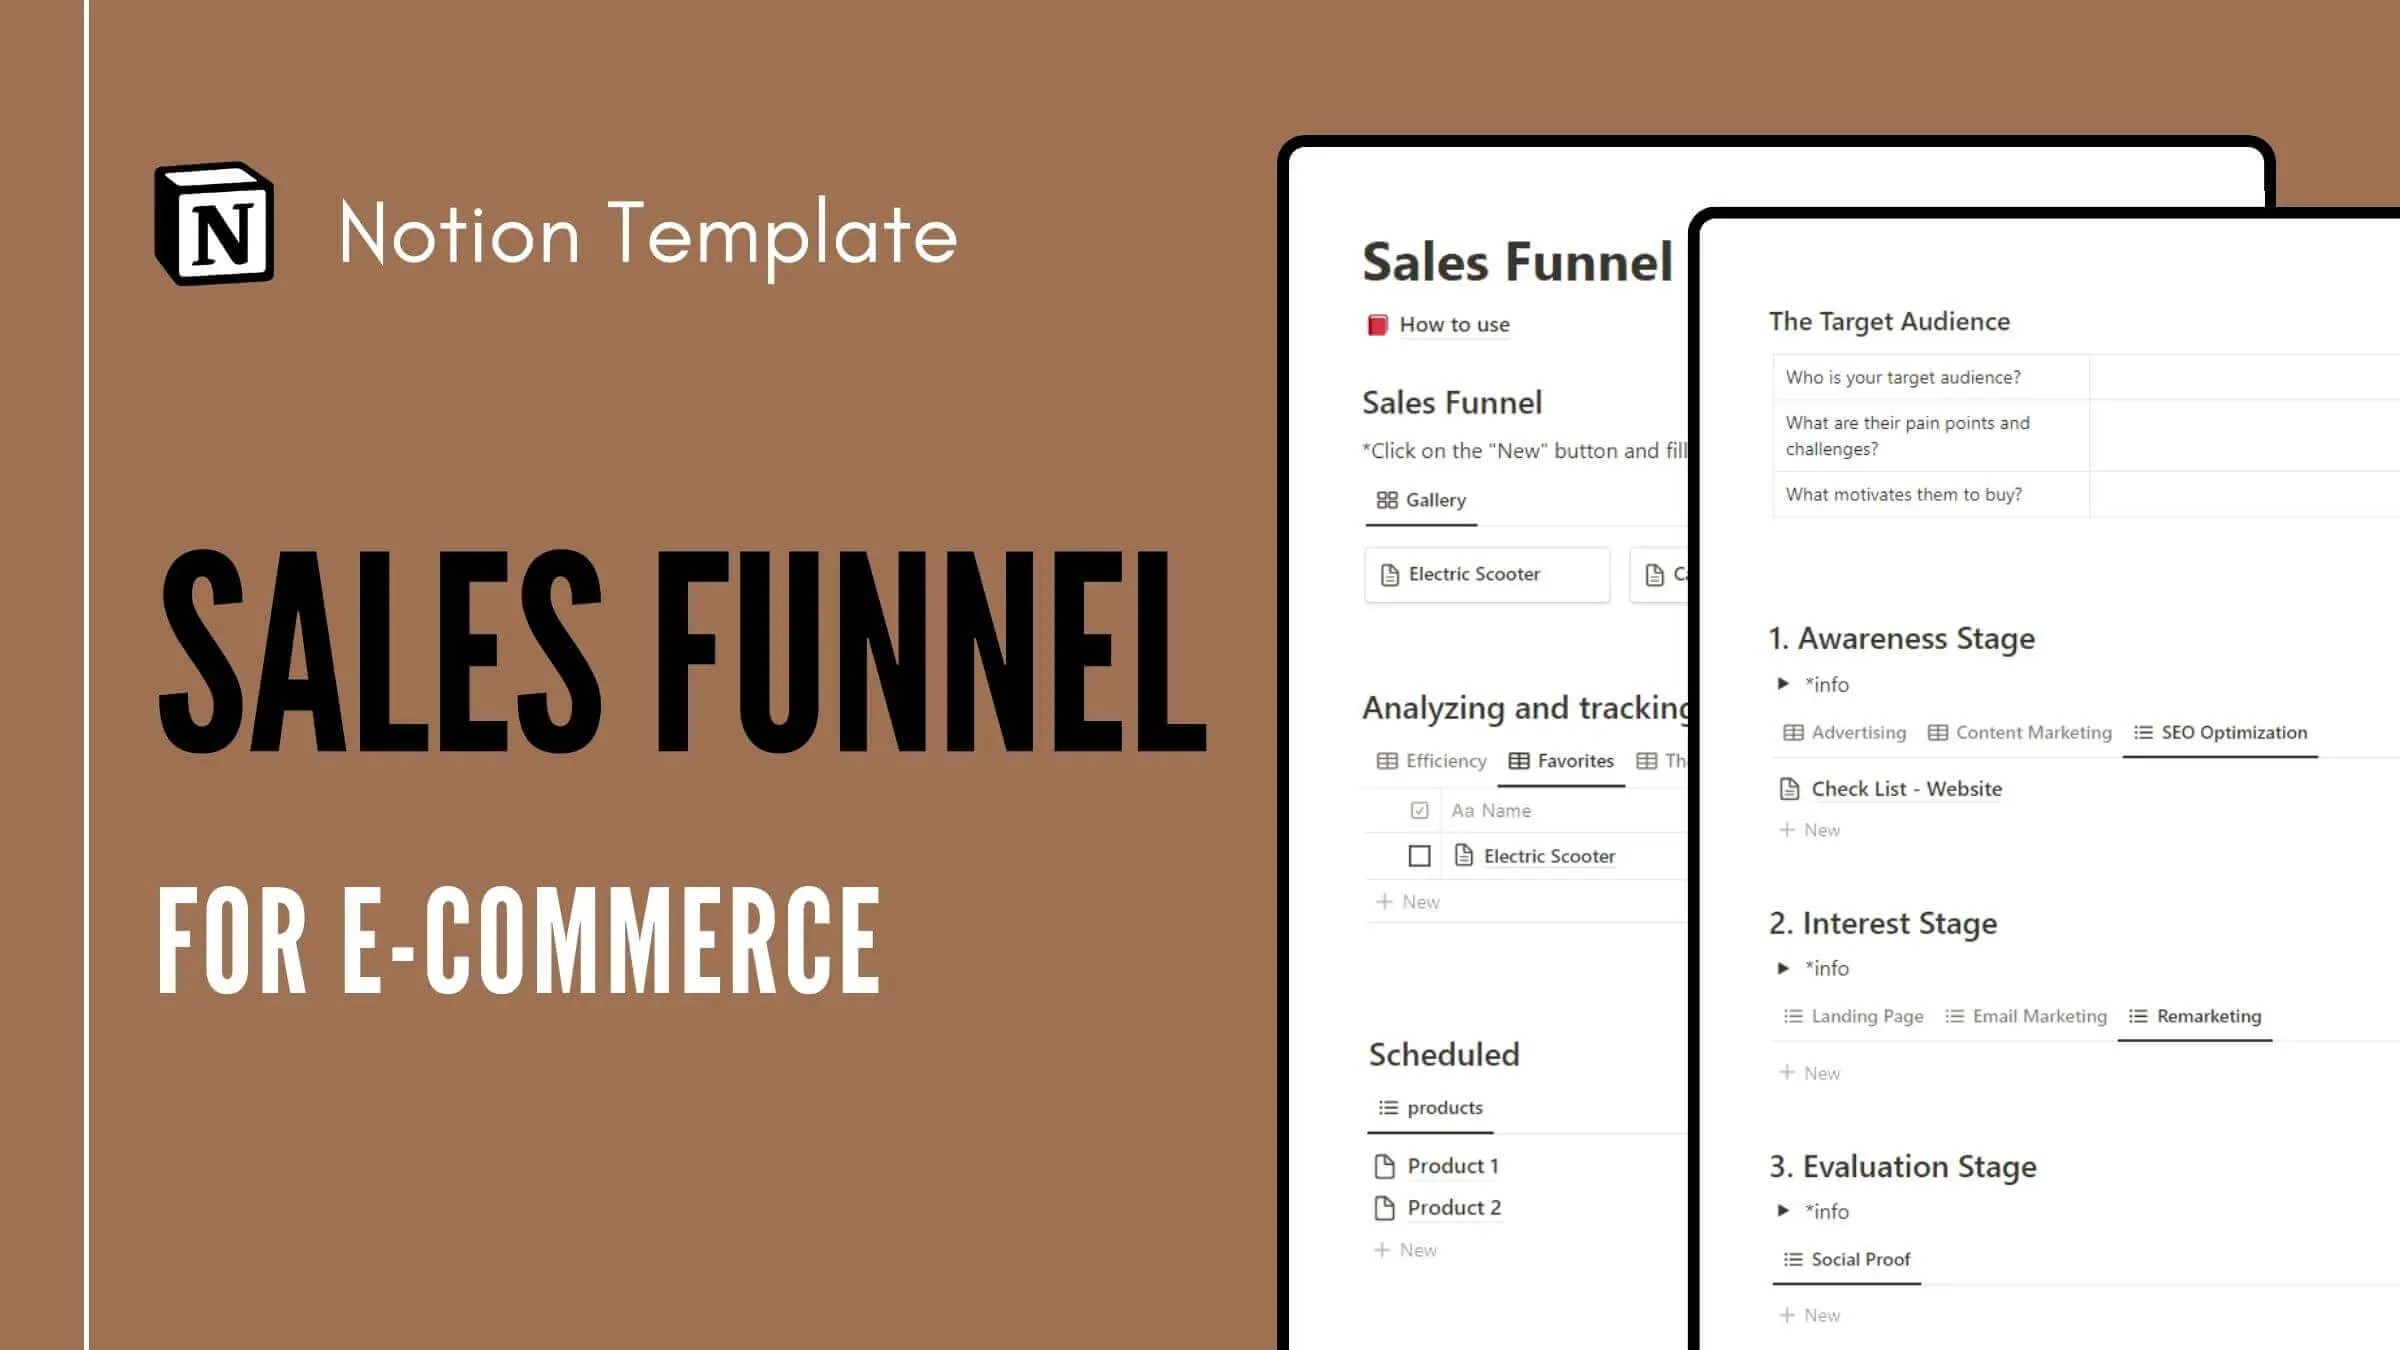 Sales Funnel For E-Commerce image